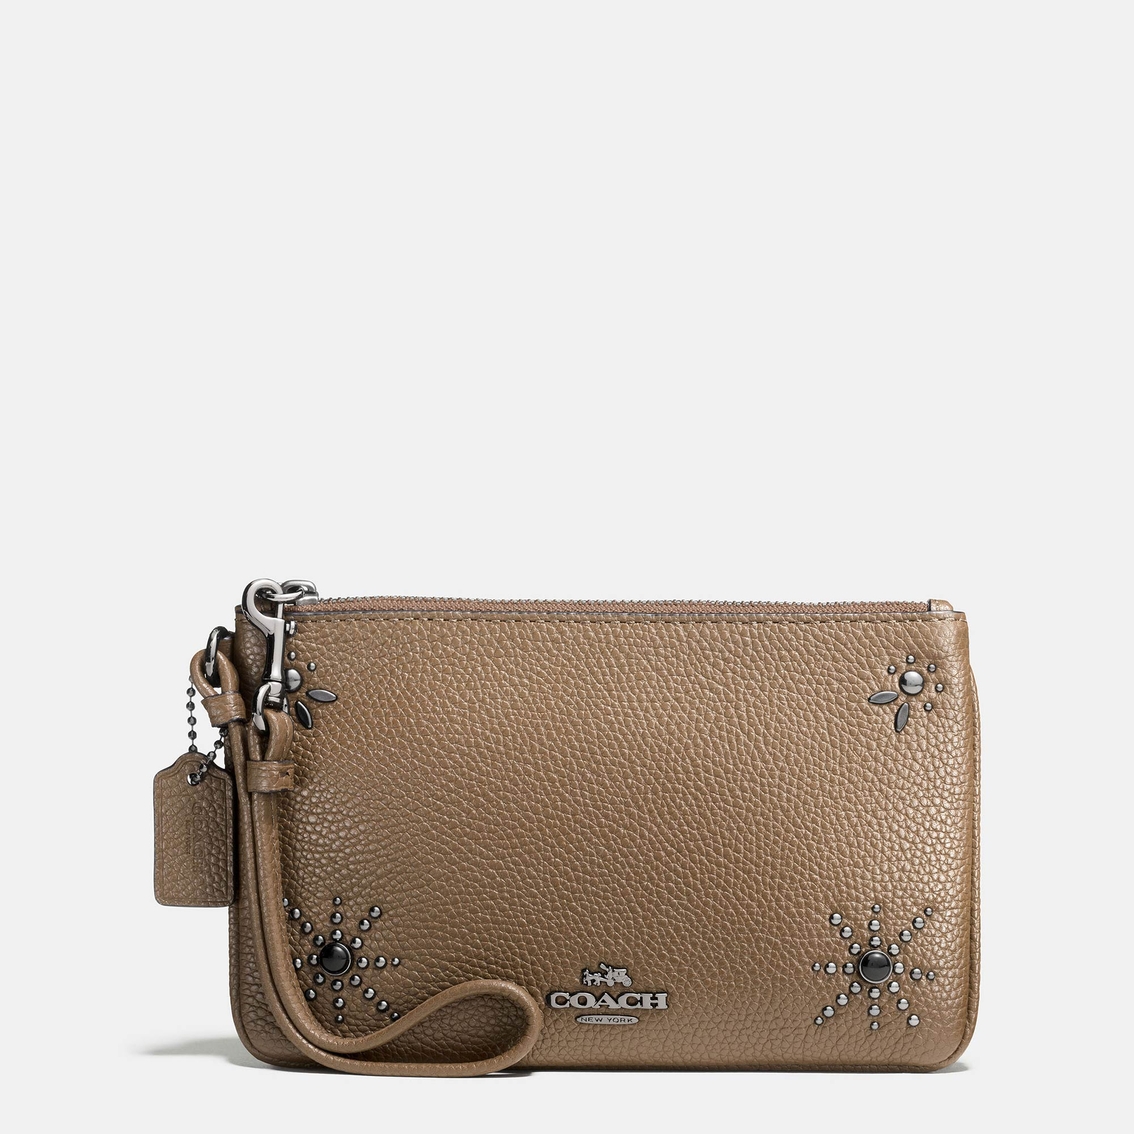 Coach Western Rivets Small Wristlet In Polished Pebble Leather | Wristlets, Clutches | Handbags ...